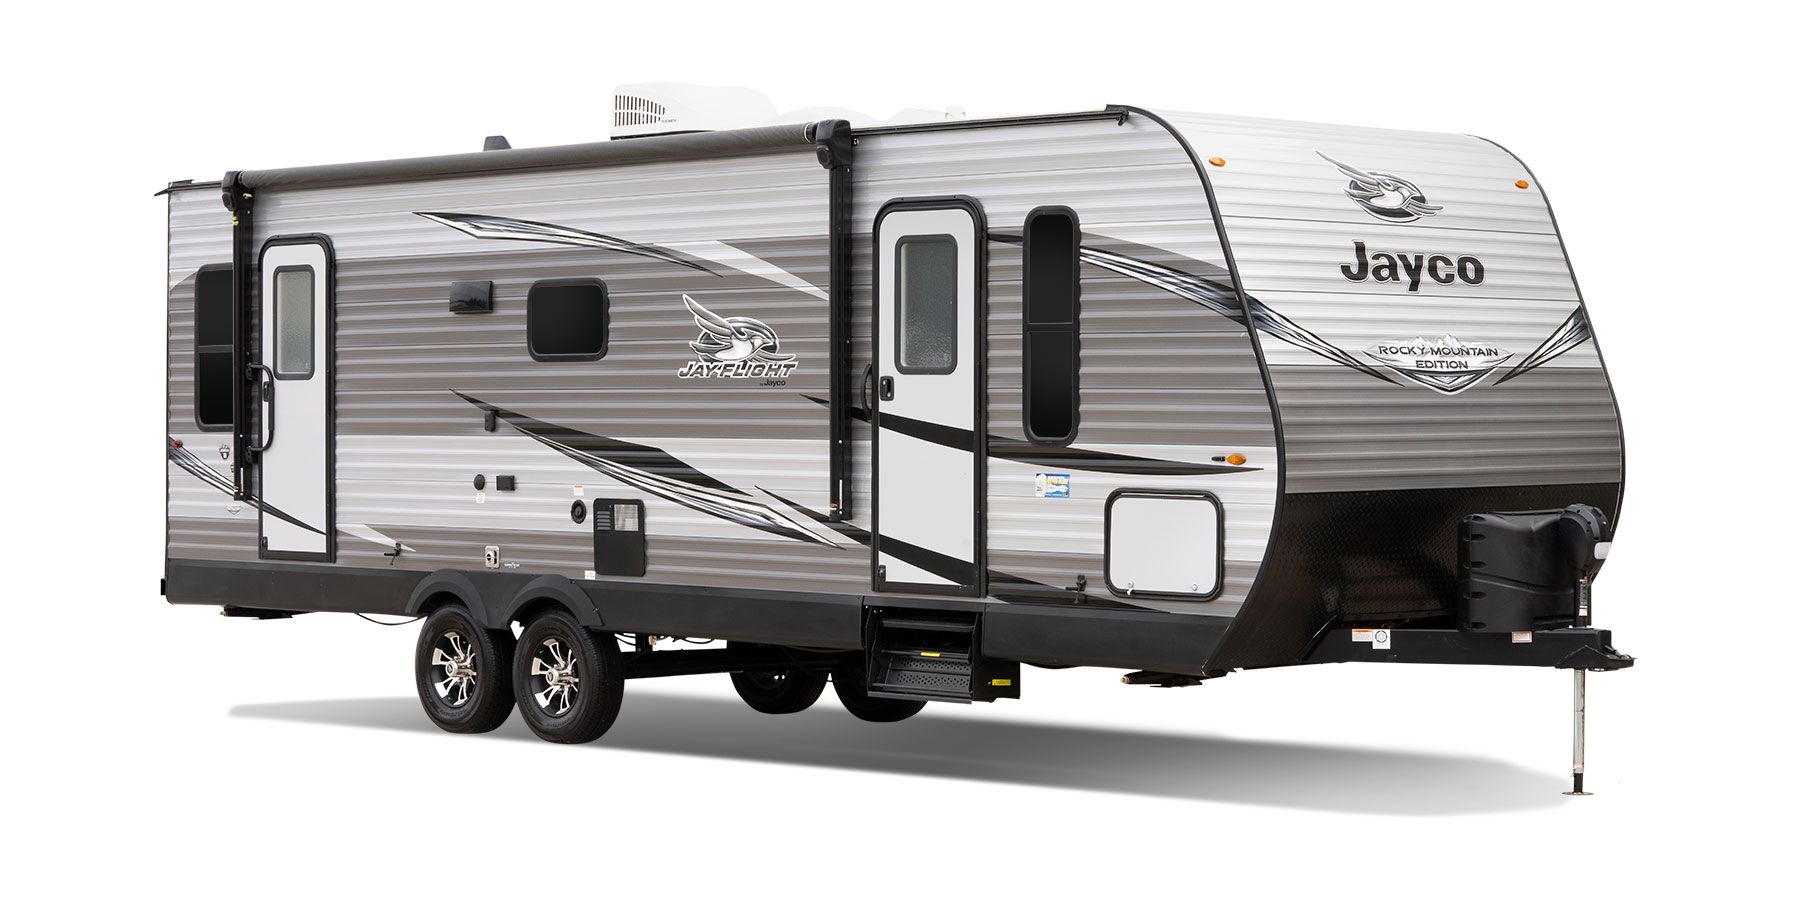 What is Jayco Rocky Mountain Edition - Outdoor Driving